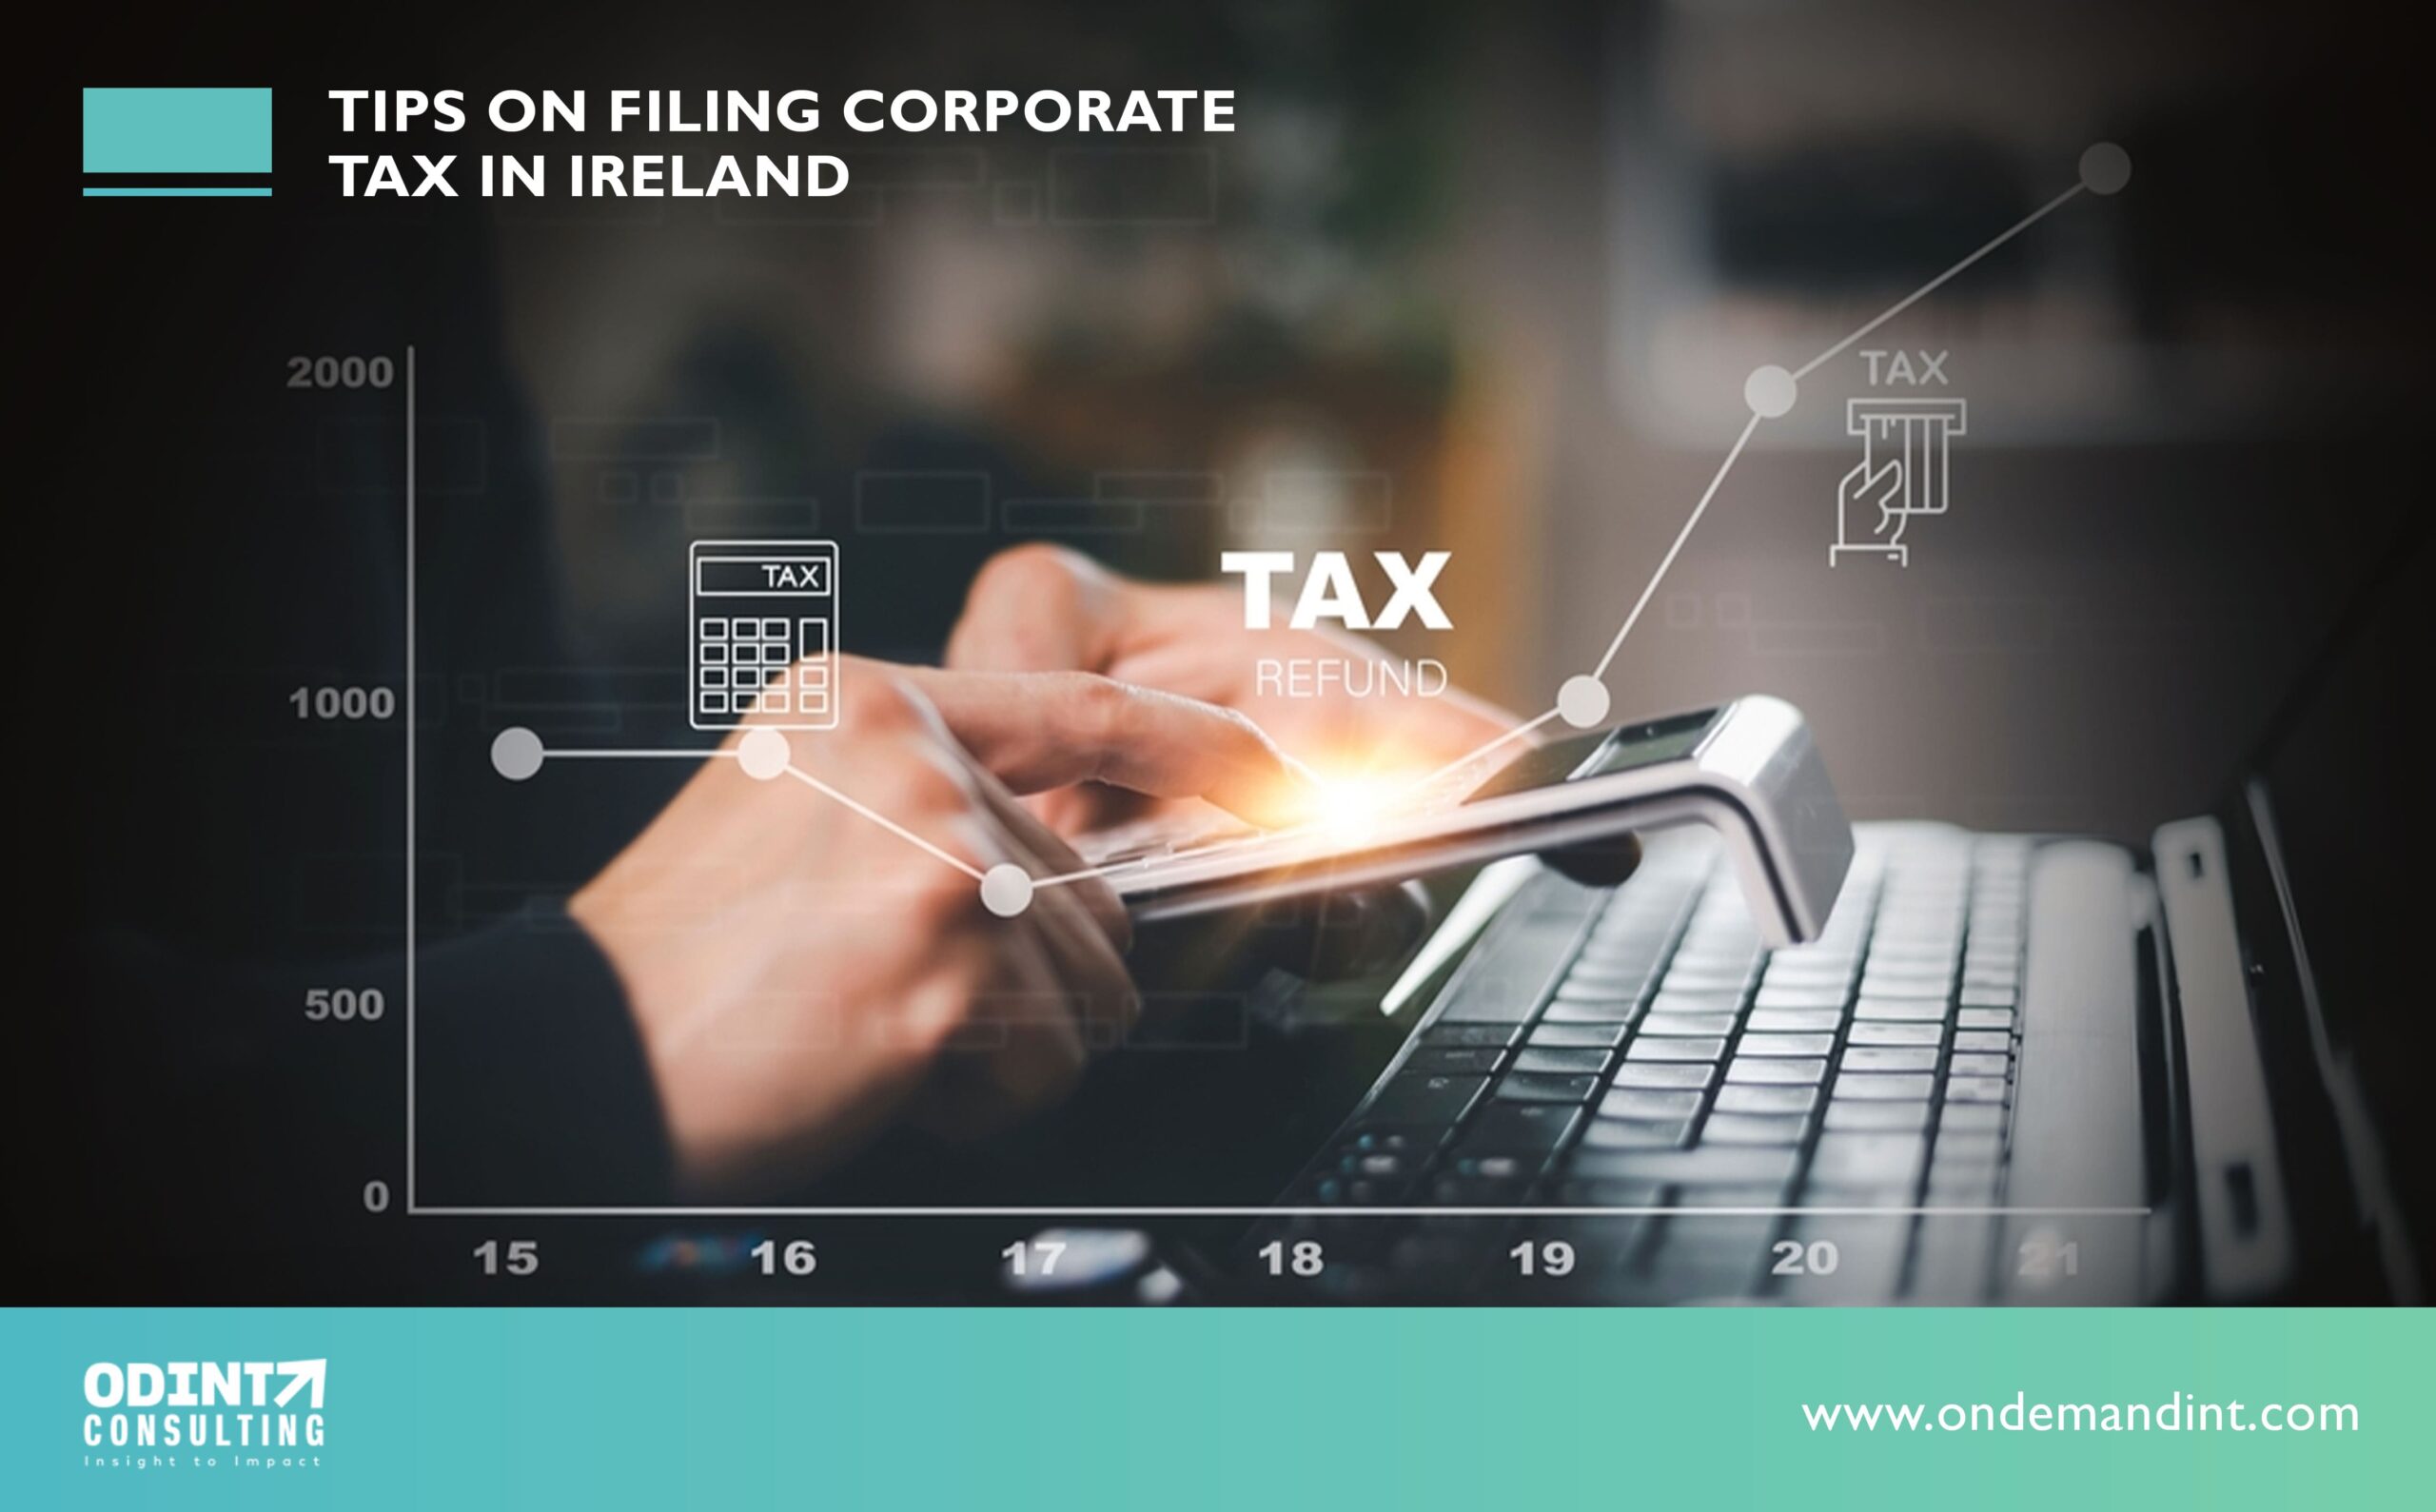 5 Tips For Filing Corporate Tax in Ireland